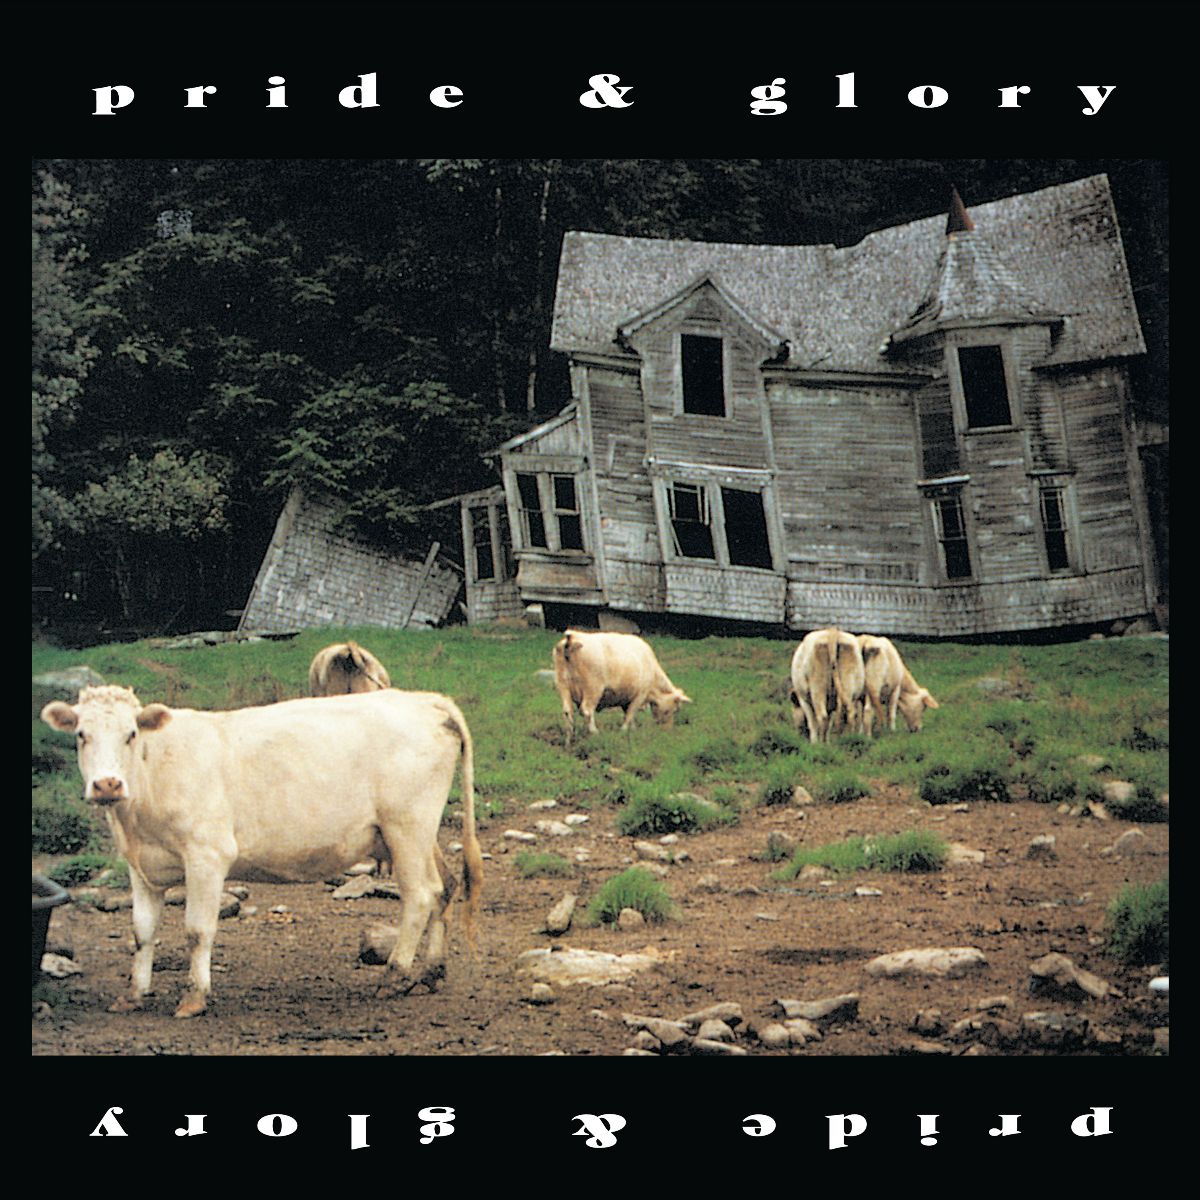 PRIDE AND GLORY S/T REISSUE DUE OUT OCTOBER 25, 2019